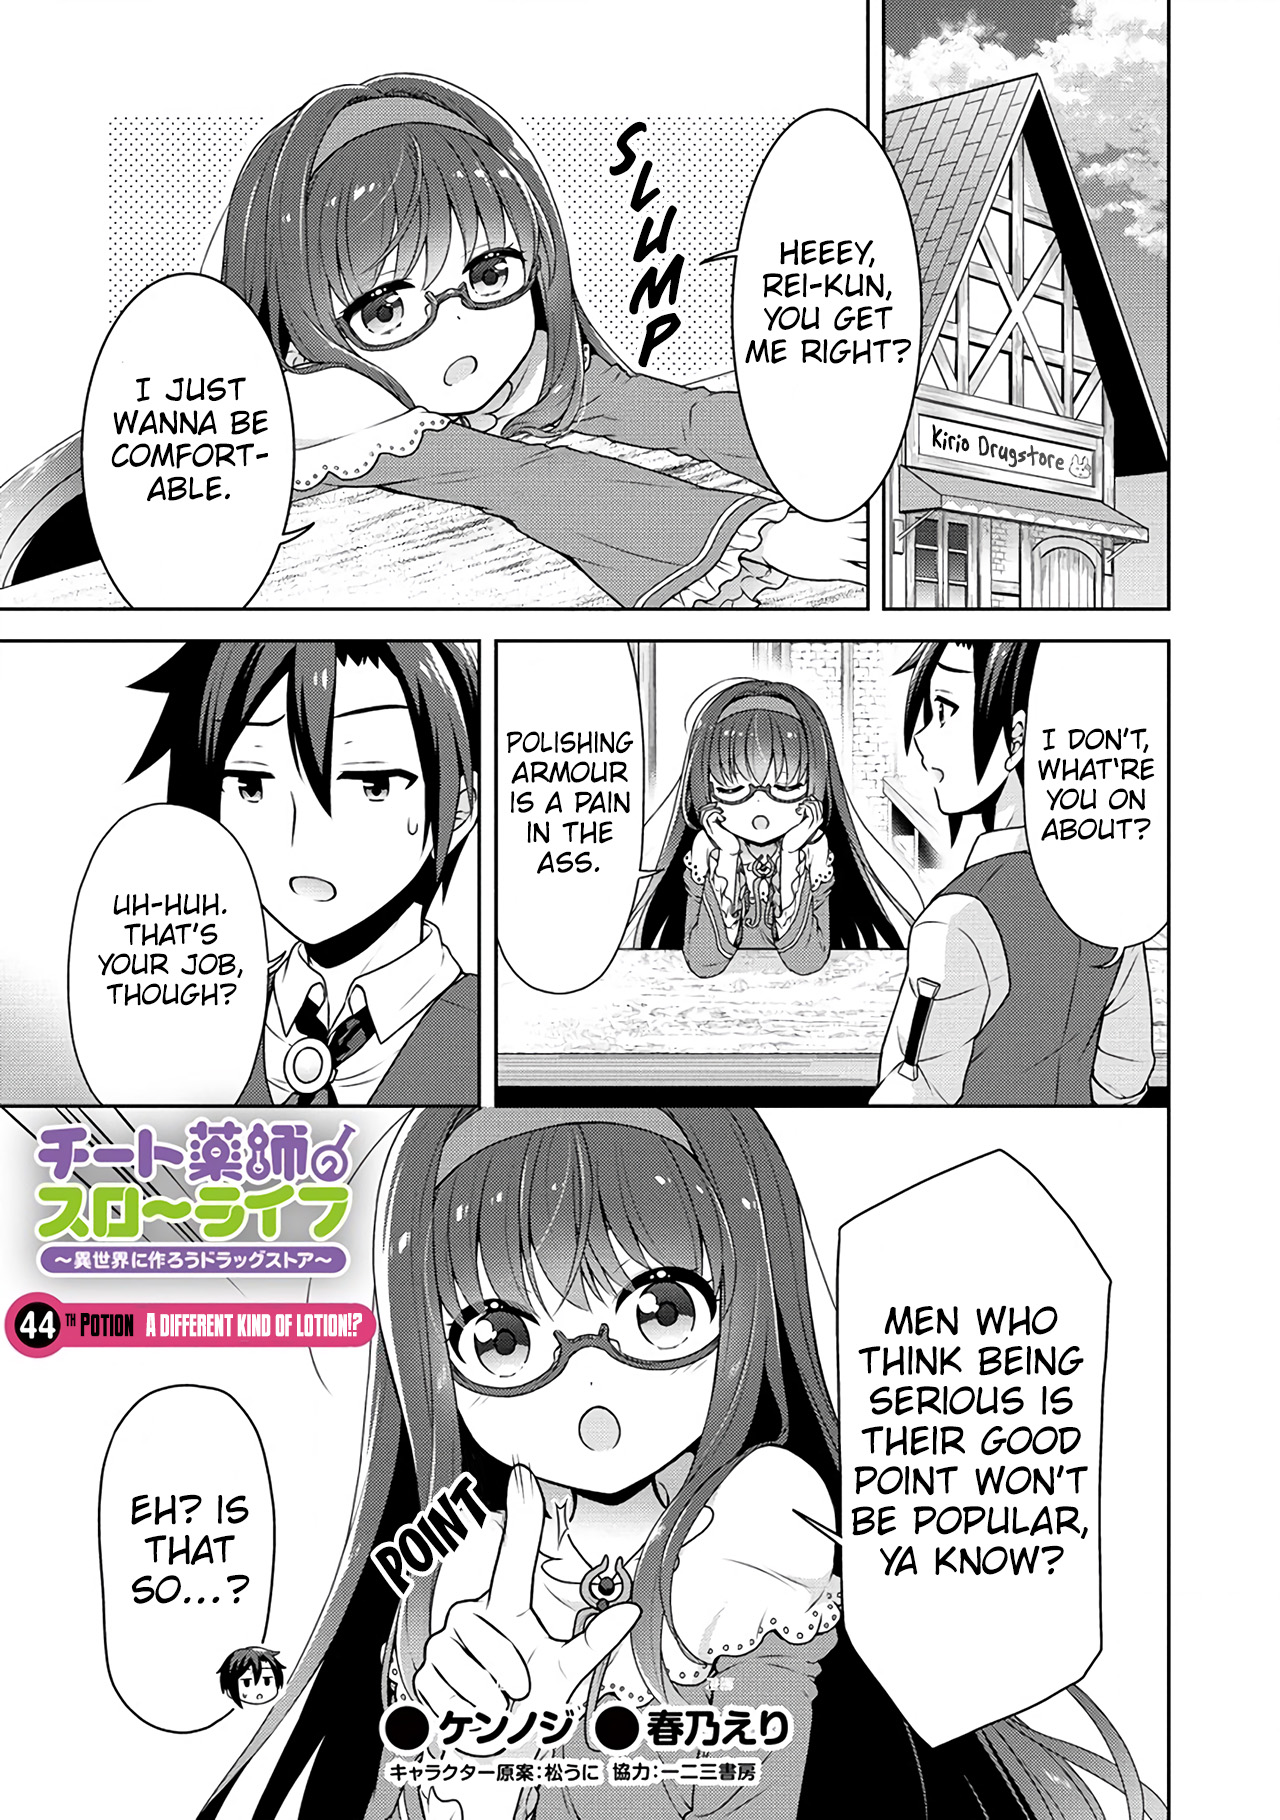 Cheat Kusushi No Slow Life: Isekai Ni Tsukurou Drugstore Vol.9 Chapter 44: A Different Kind Of Lotion!? - Picture 2